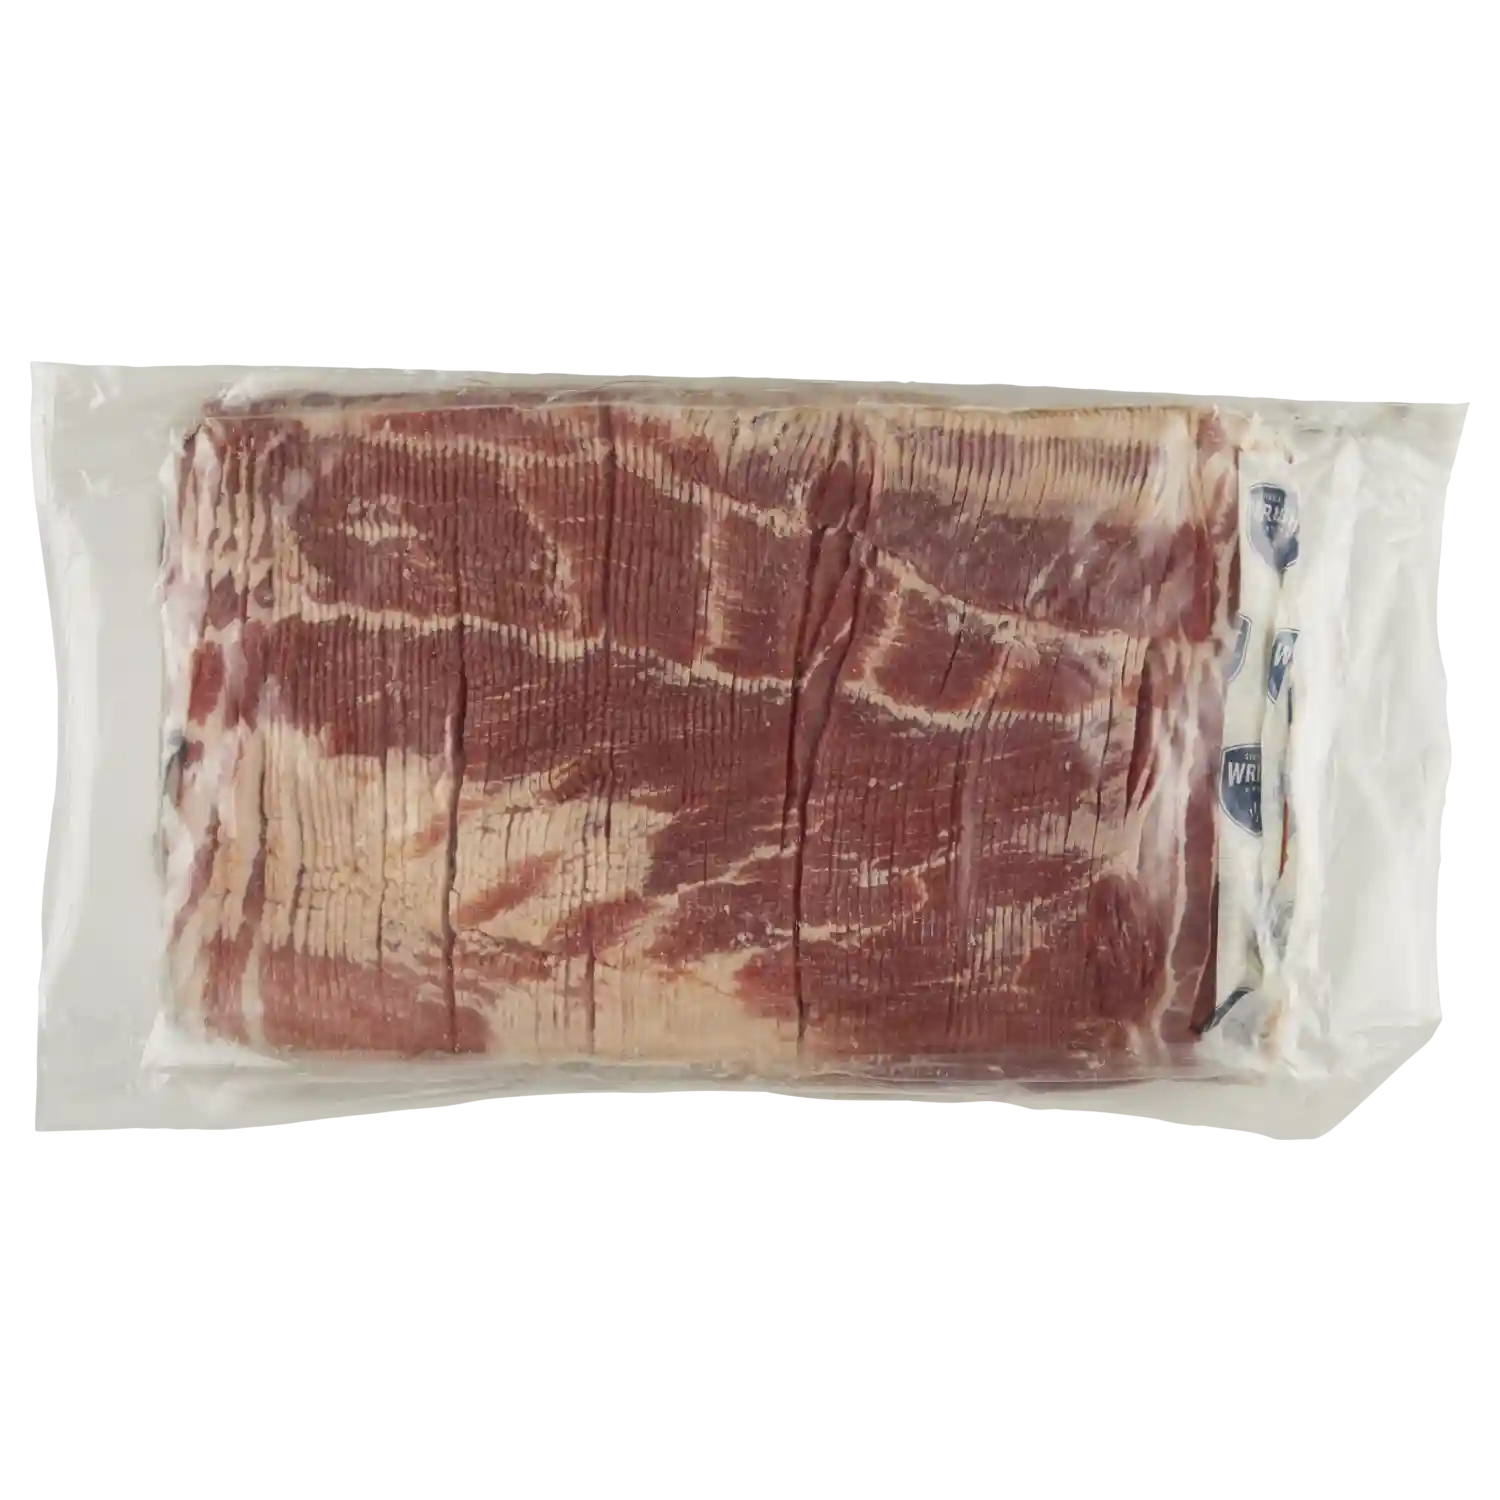 Wright® Brand Naturally Hickory Smoked Extra Extra Thick Sliced Steak Cut Bacon, Bulk, 15 Lbs, 2 Slices/Inch, Gas Flushed_image_21